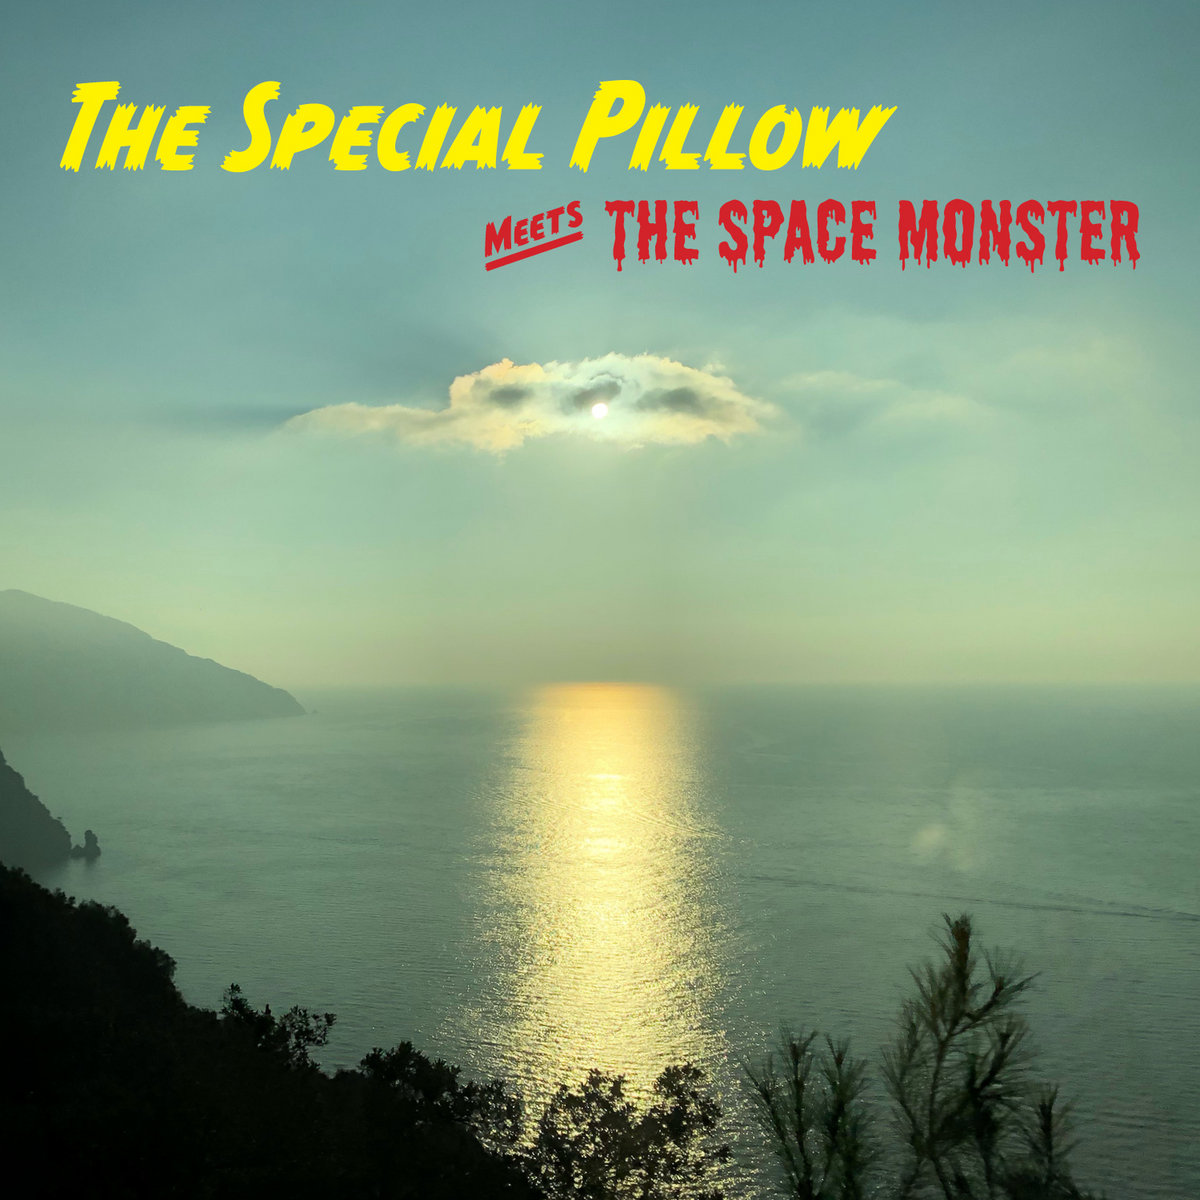 STEREO EMBERS TRACK PREVIEW – ‘Give Up the Ghost’ from The Special Pillow’s Upcoming LP “The Special Ghost Meets The Space Monster,” including Songwriter Commentary